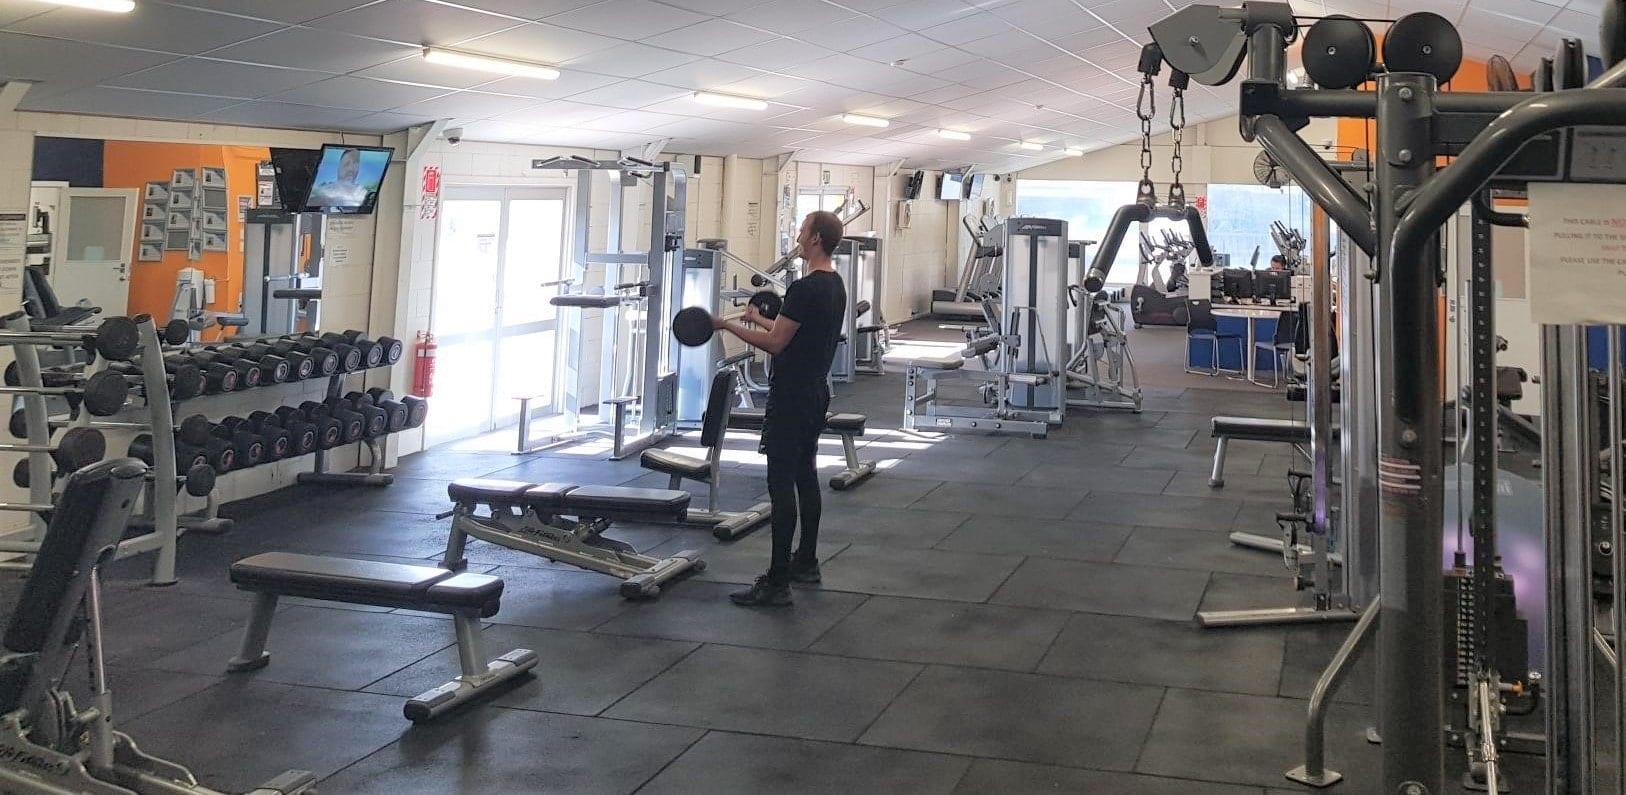 Advance Fitness Invercargill Gym Weights Area